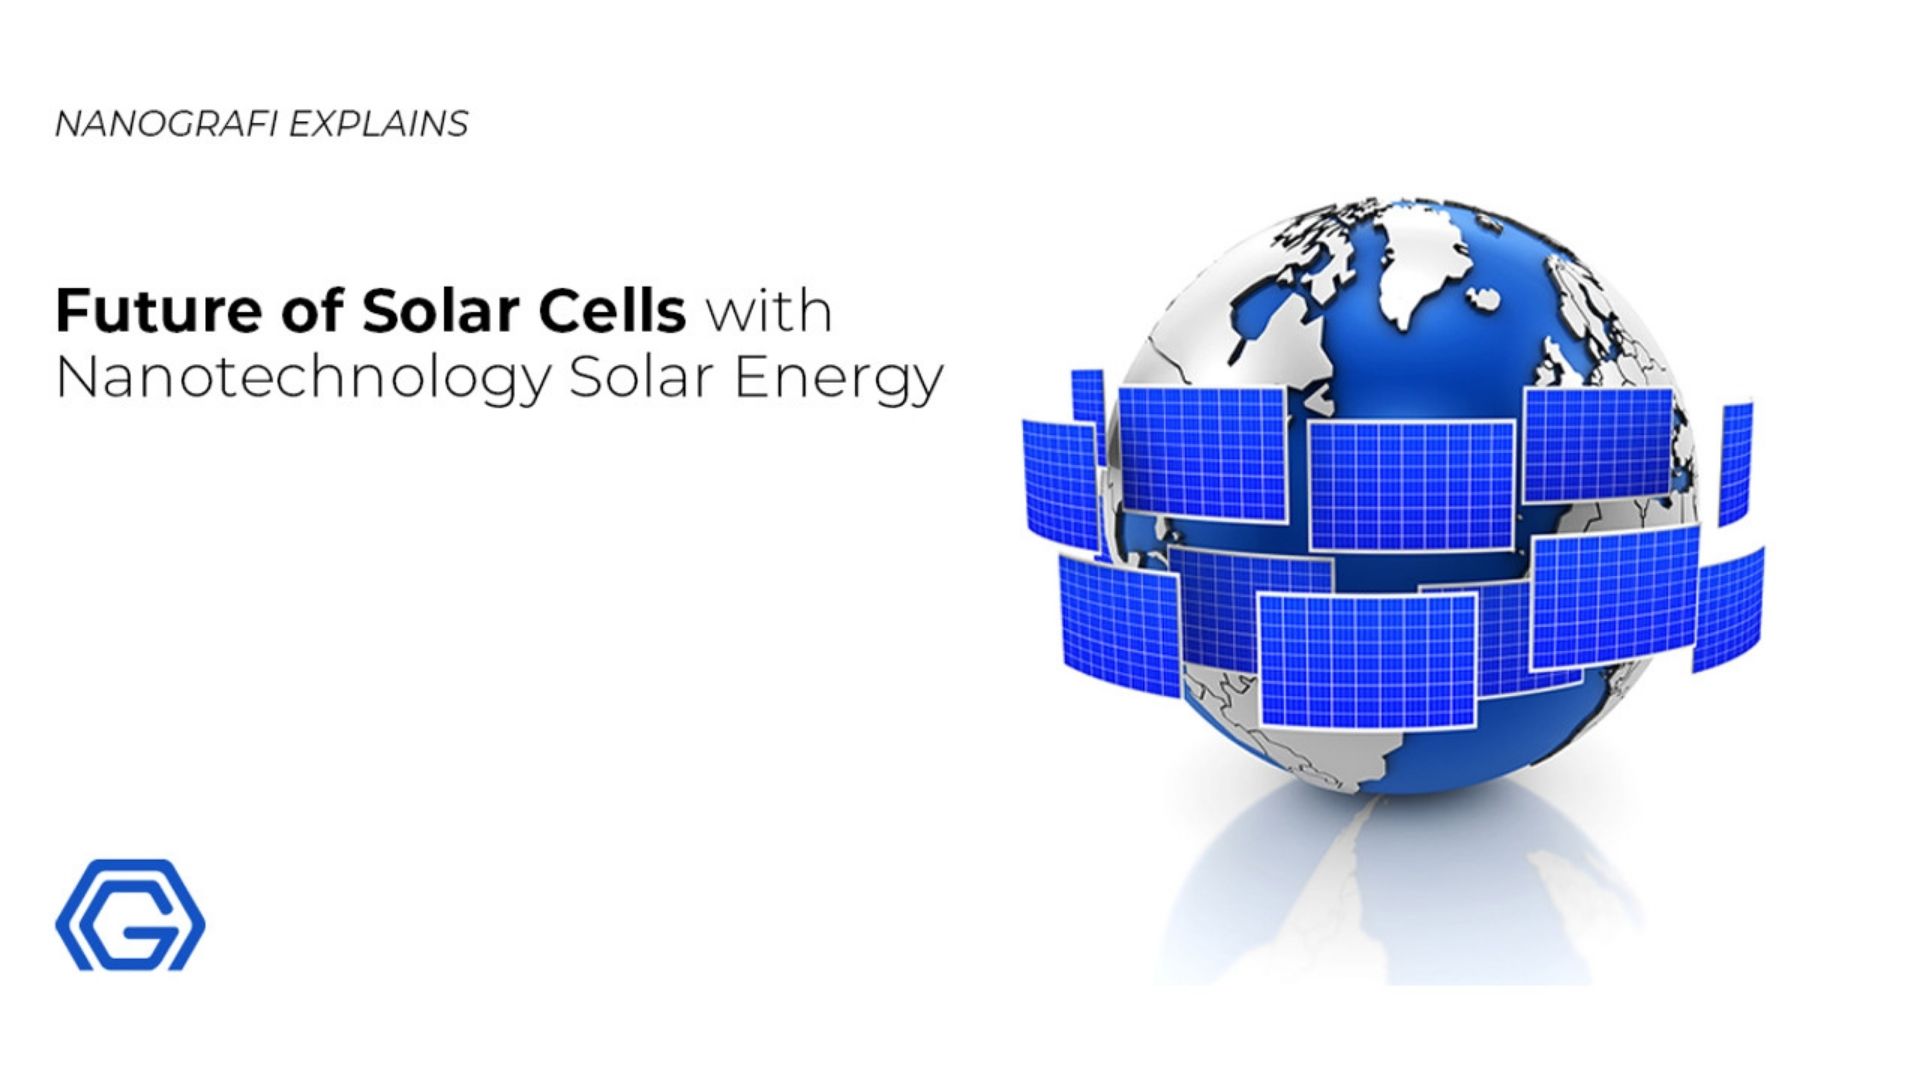 Future of solar cells with nanotechnology solar energy